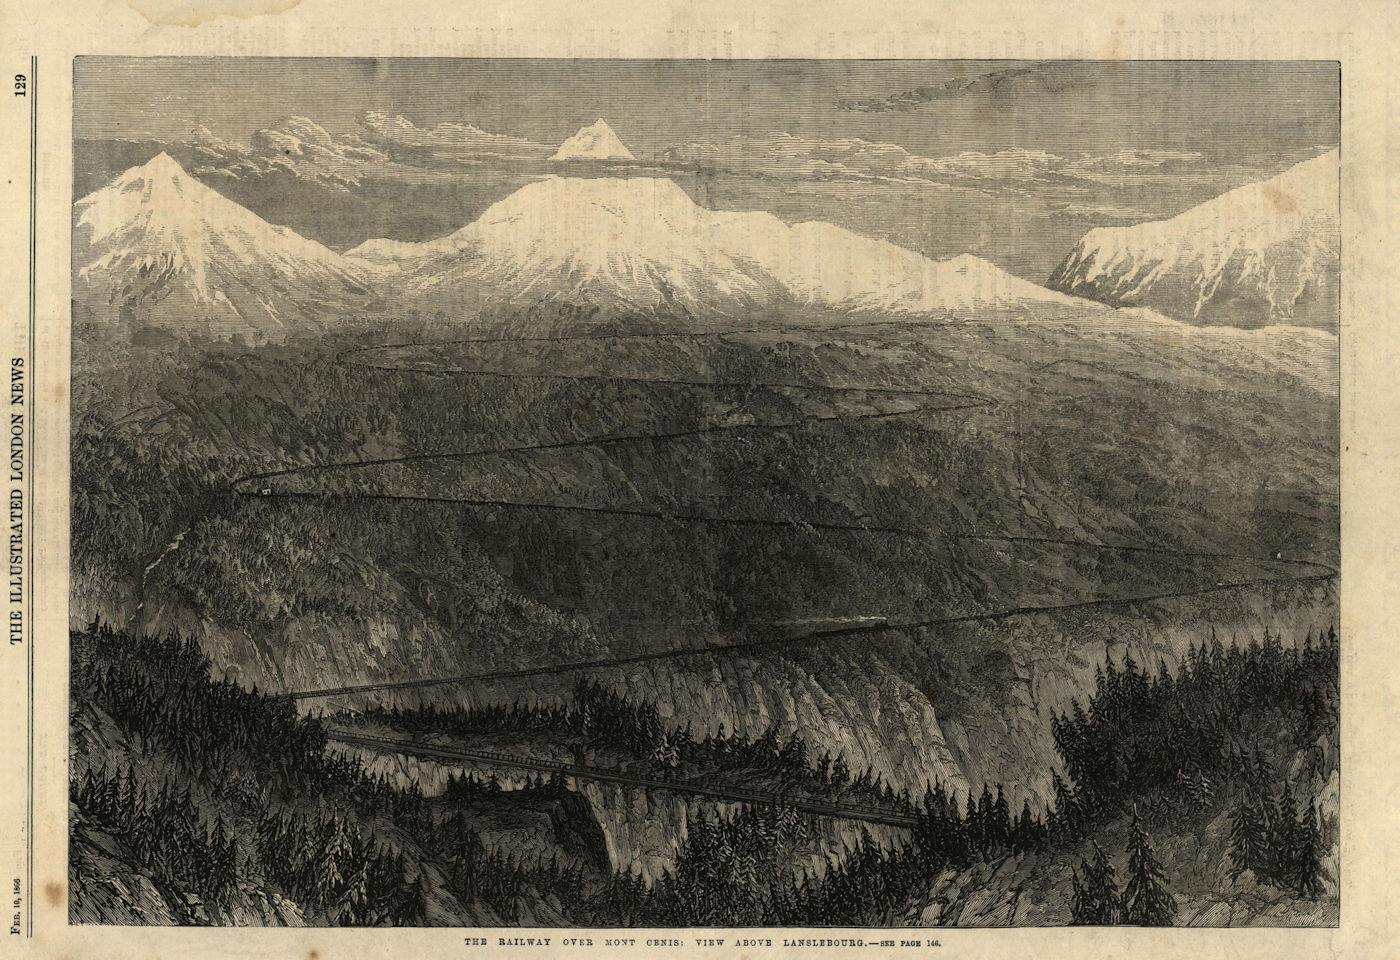 The railway over Mont Cenis: View above Lanslebourg. Savoie 1866 old print